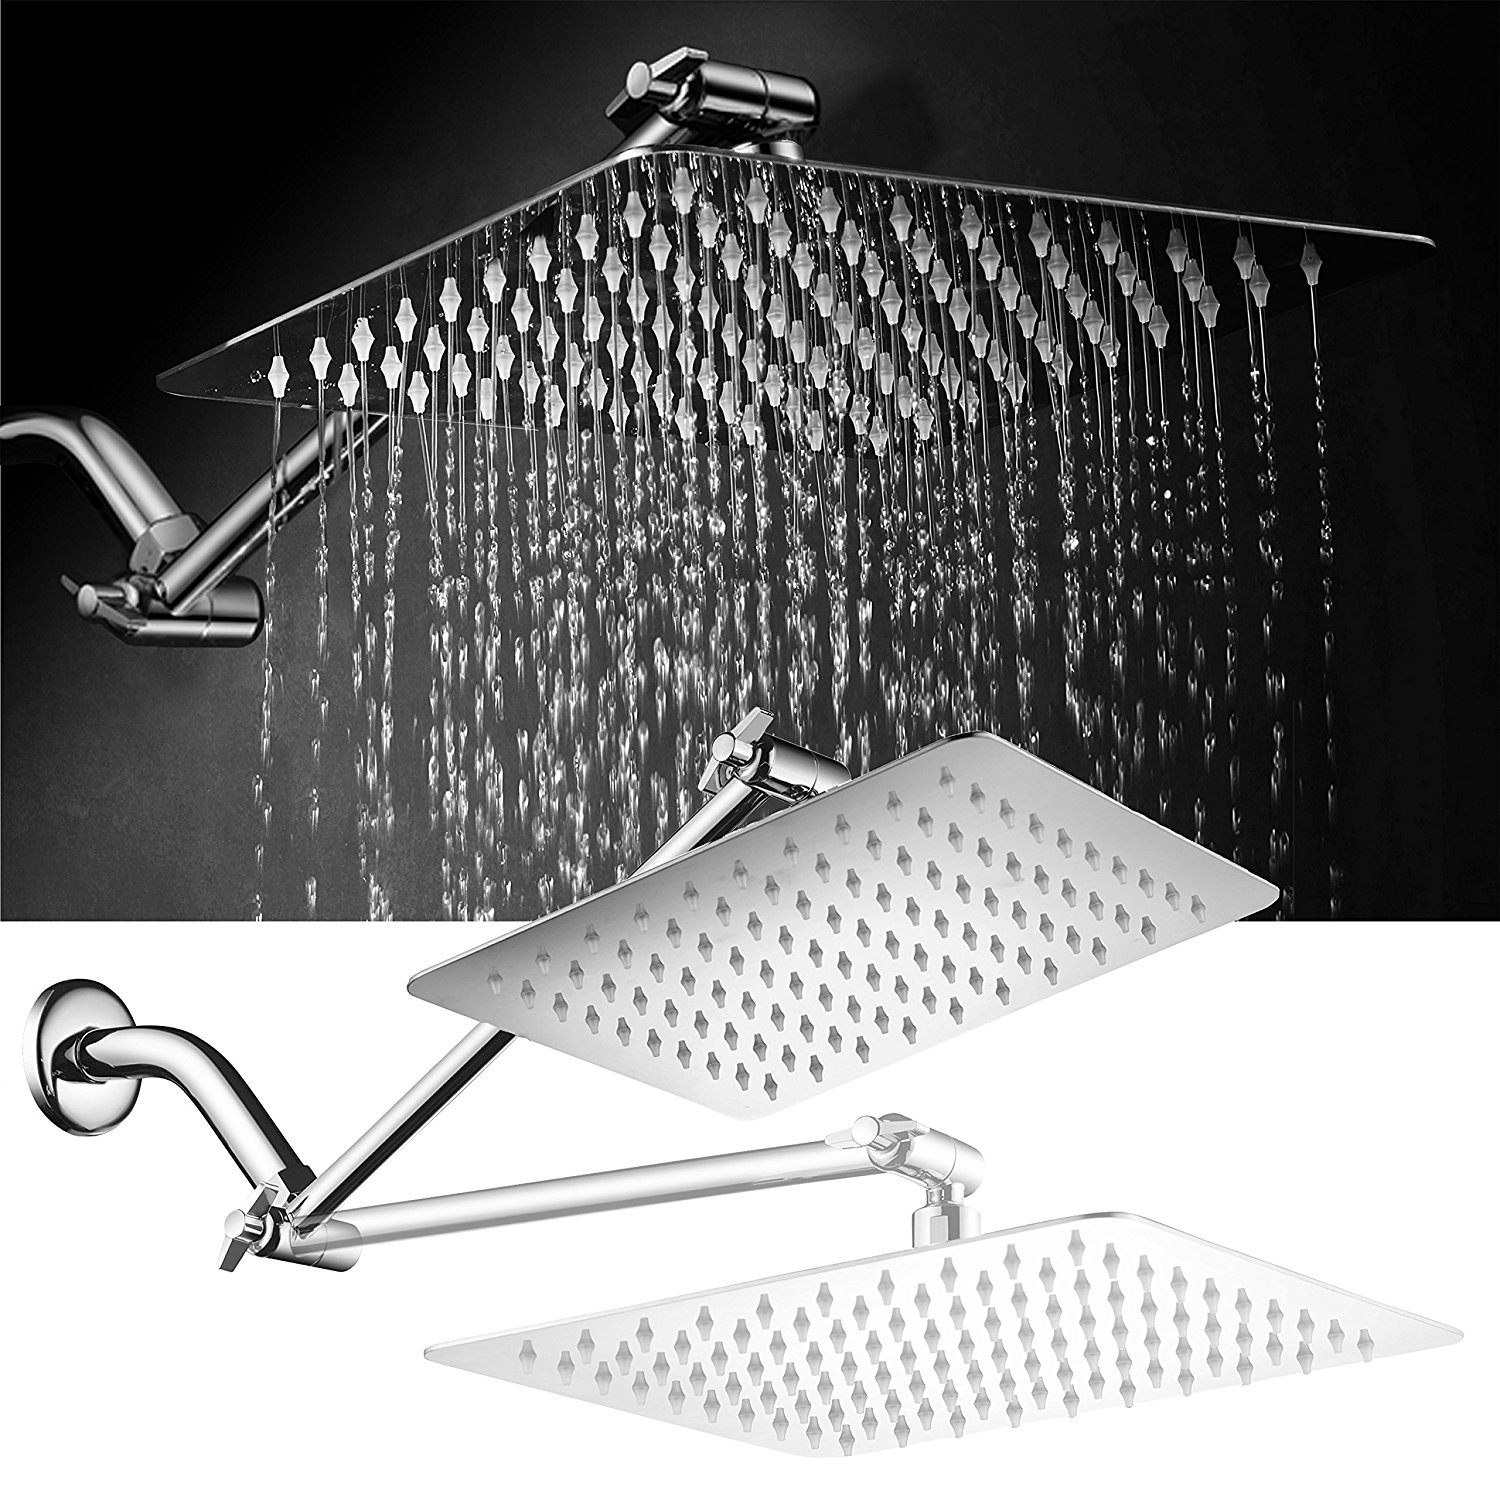 HotelSpa Giant 10" Stainless Steel Rainfall Square Showerhead with Solid Brass Adjustable Extension Arm